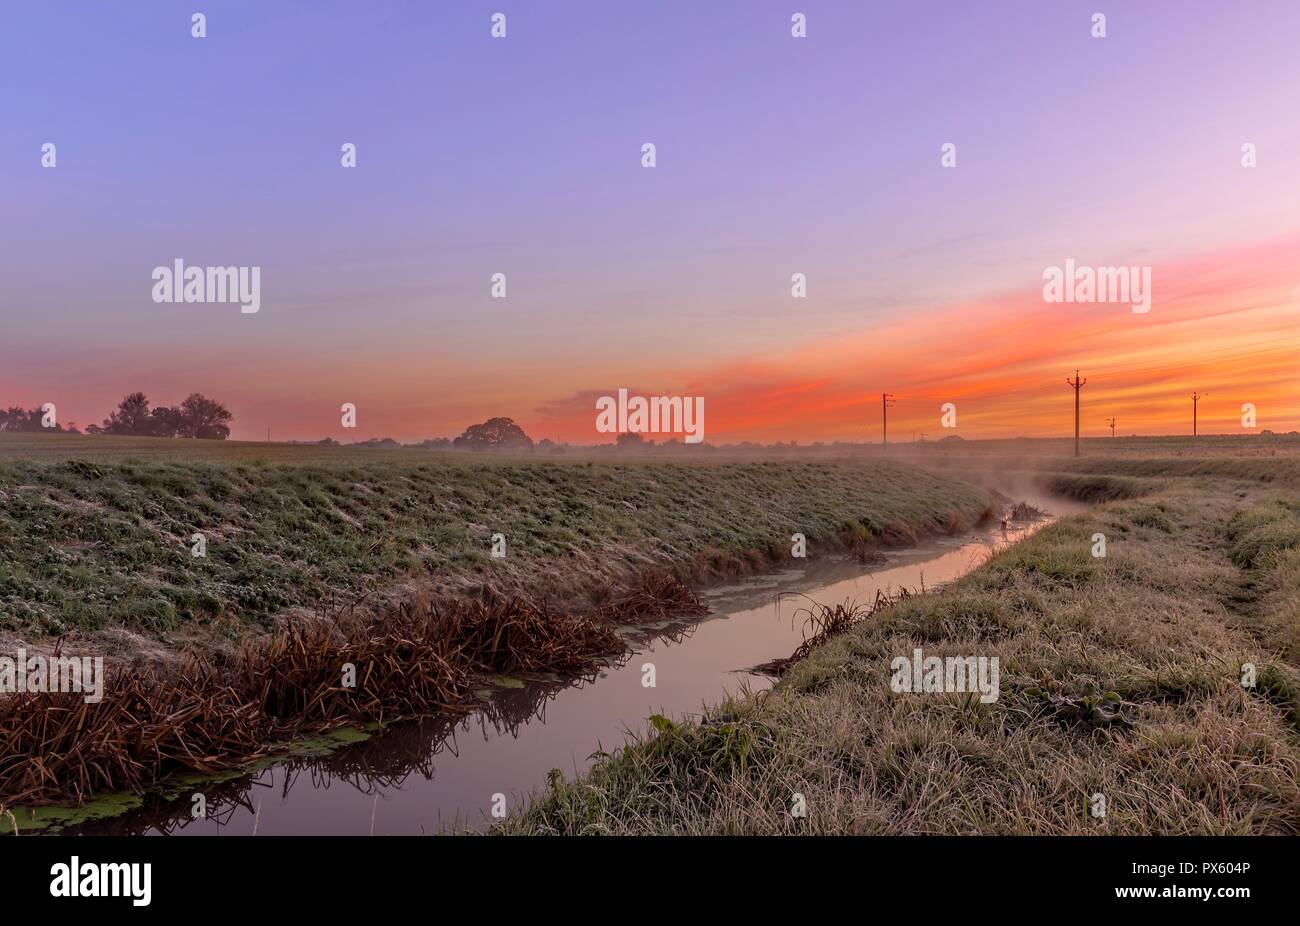 Dawn breaks across the fields with a stream running through.  A red sky is overhead. Stock Photo